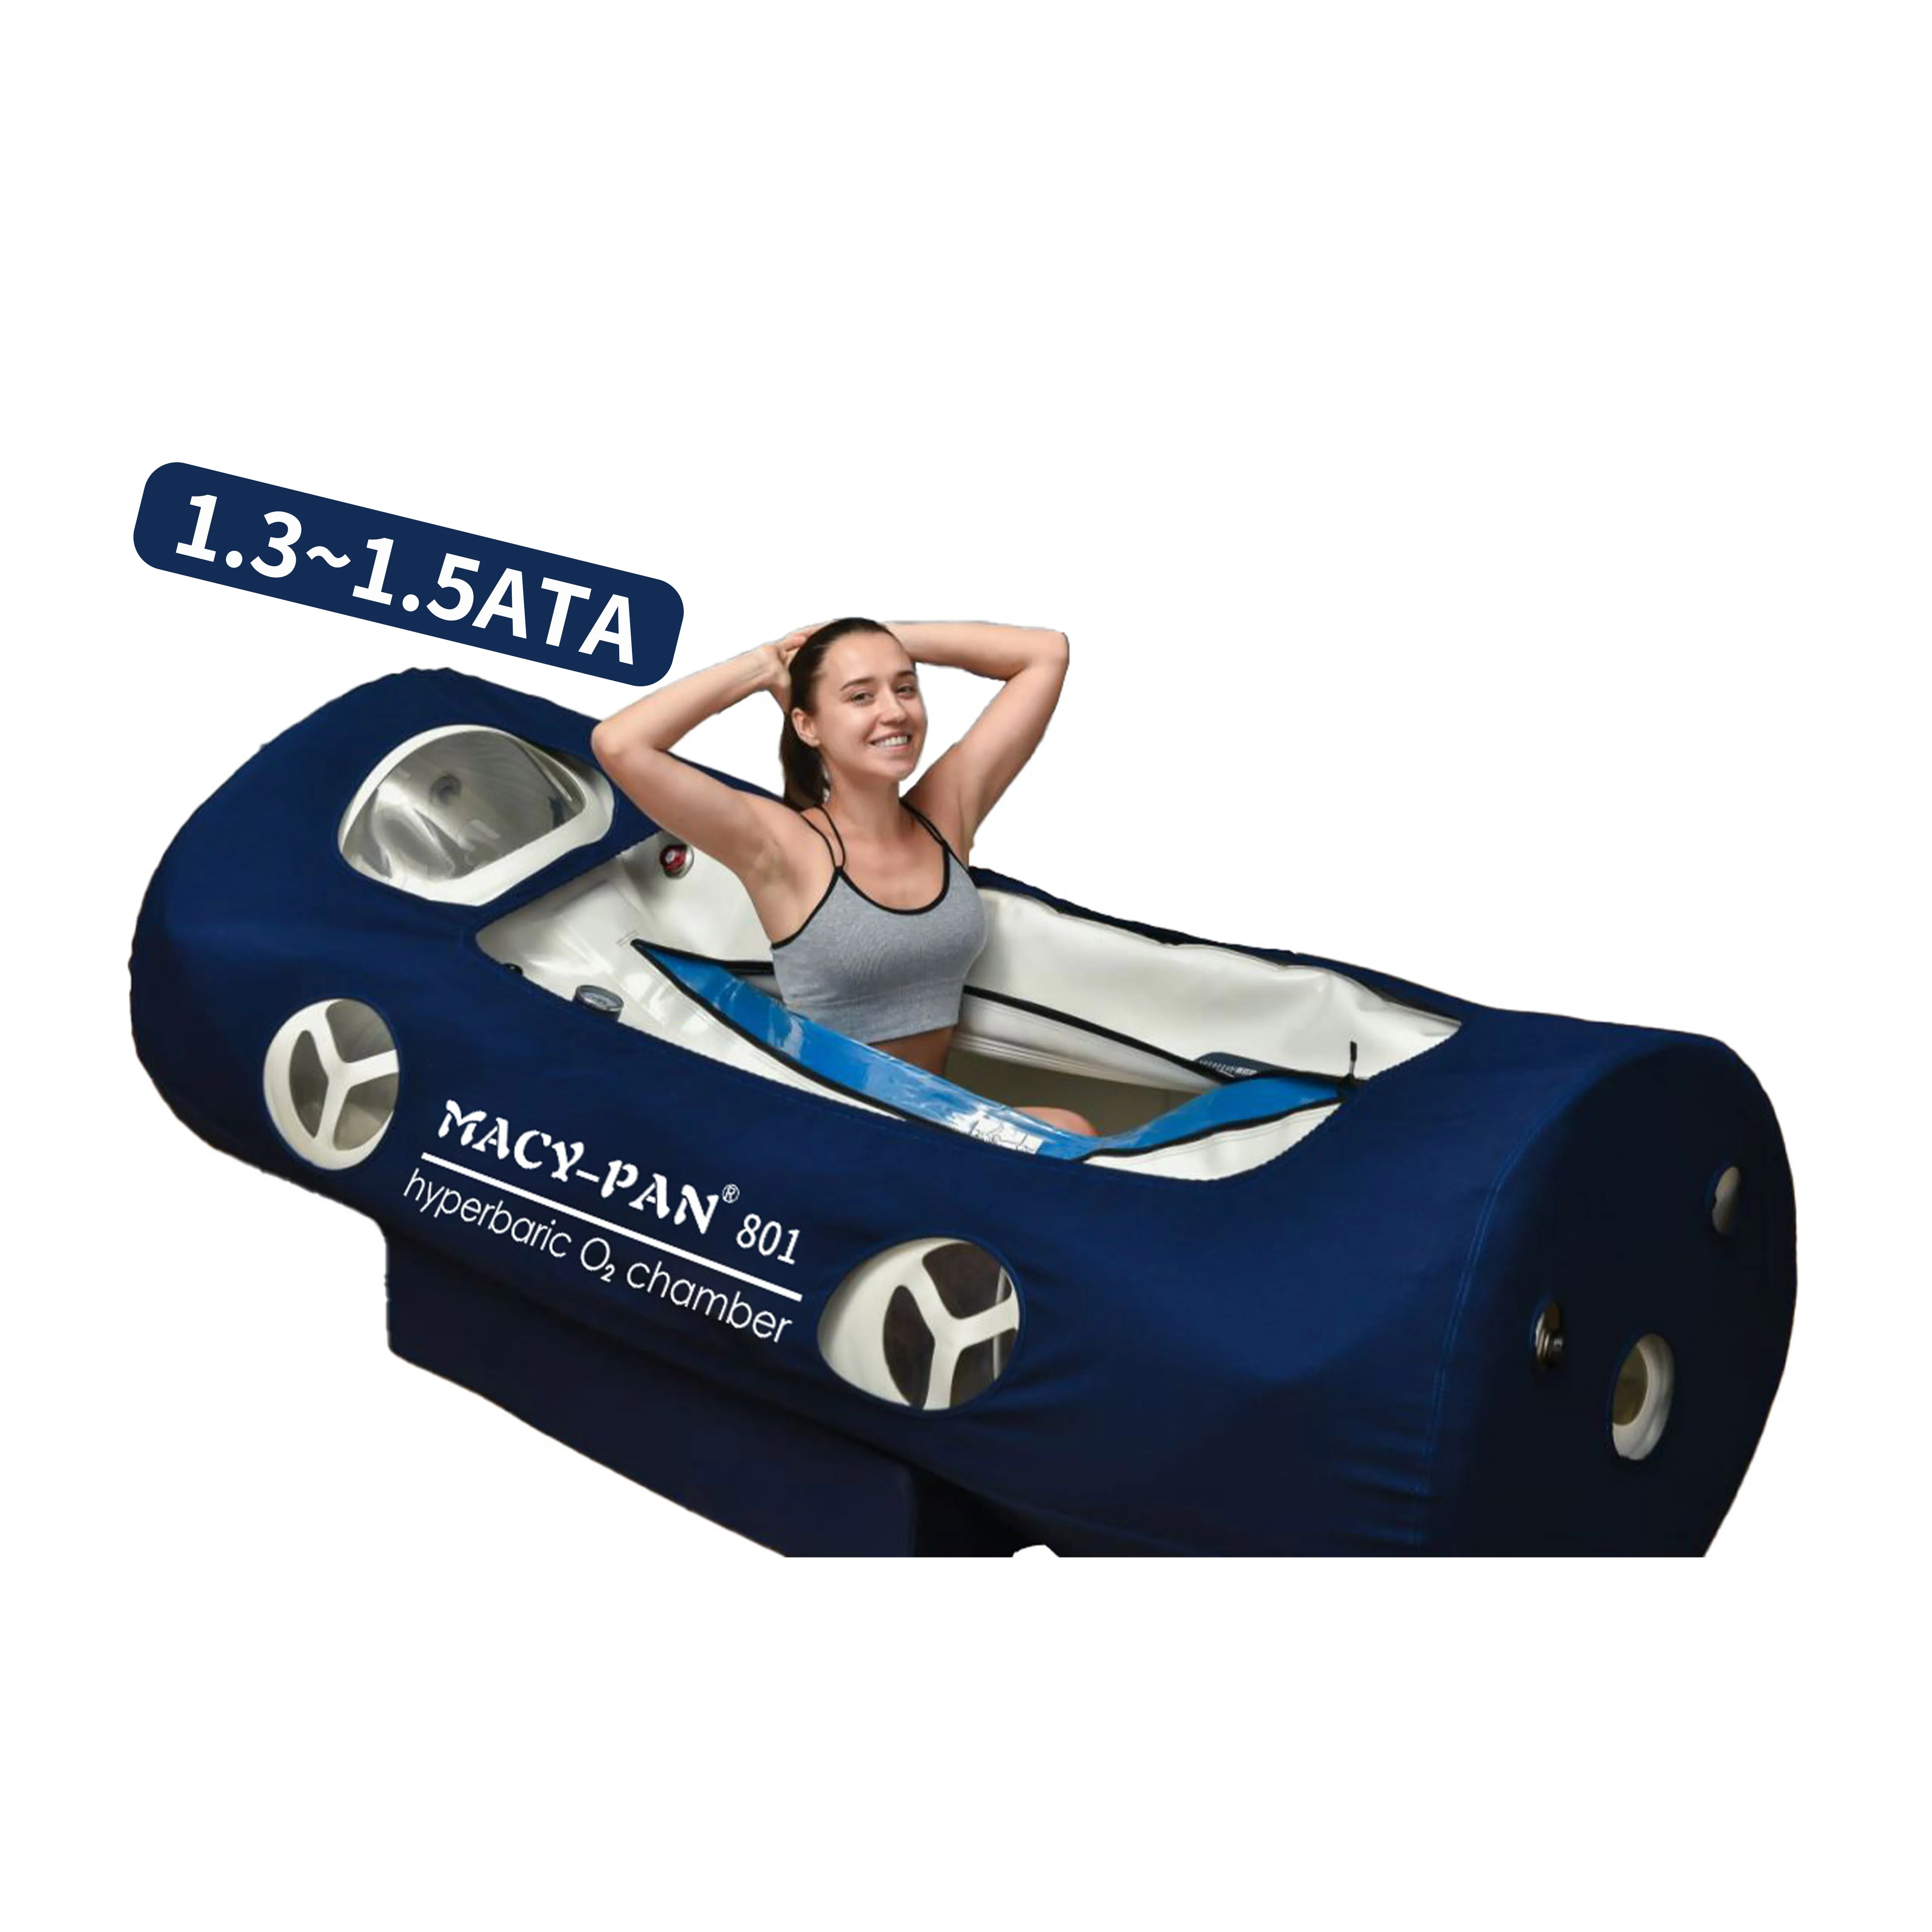 Macy-Pan ST801 Hyperbaric Chamber Portable 1.3/1.4/1.5ATA Home Use Cheap Hyperbaric Oxygen Chamber Therapy with CN Plugs